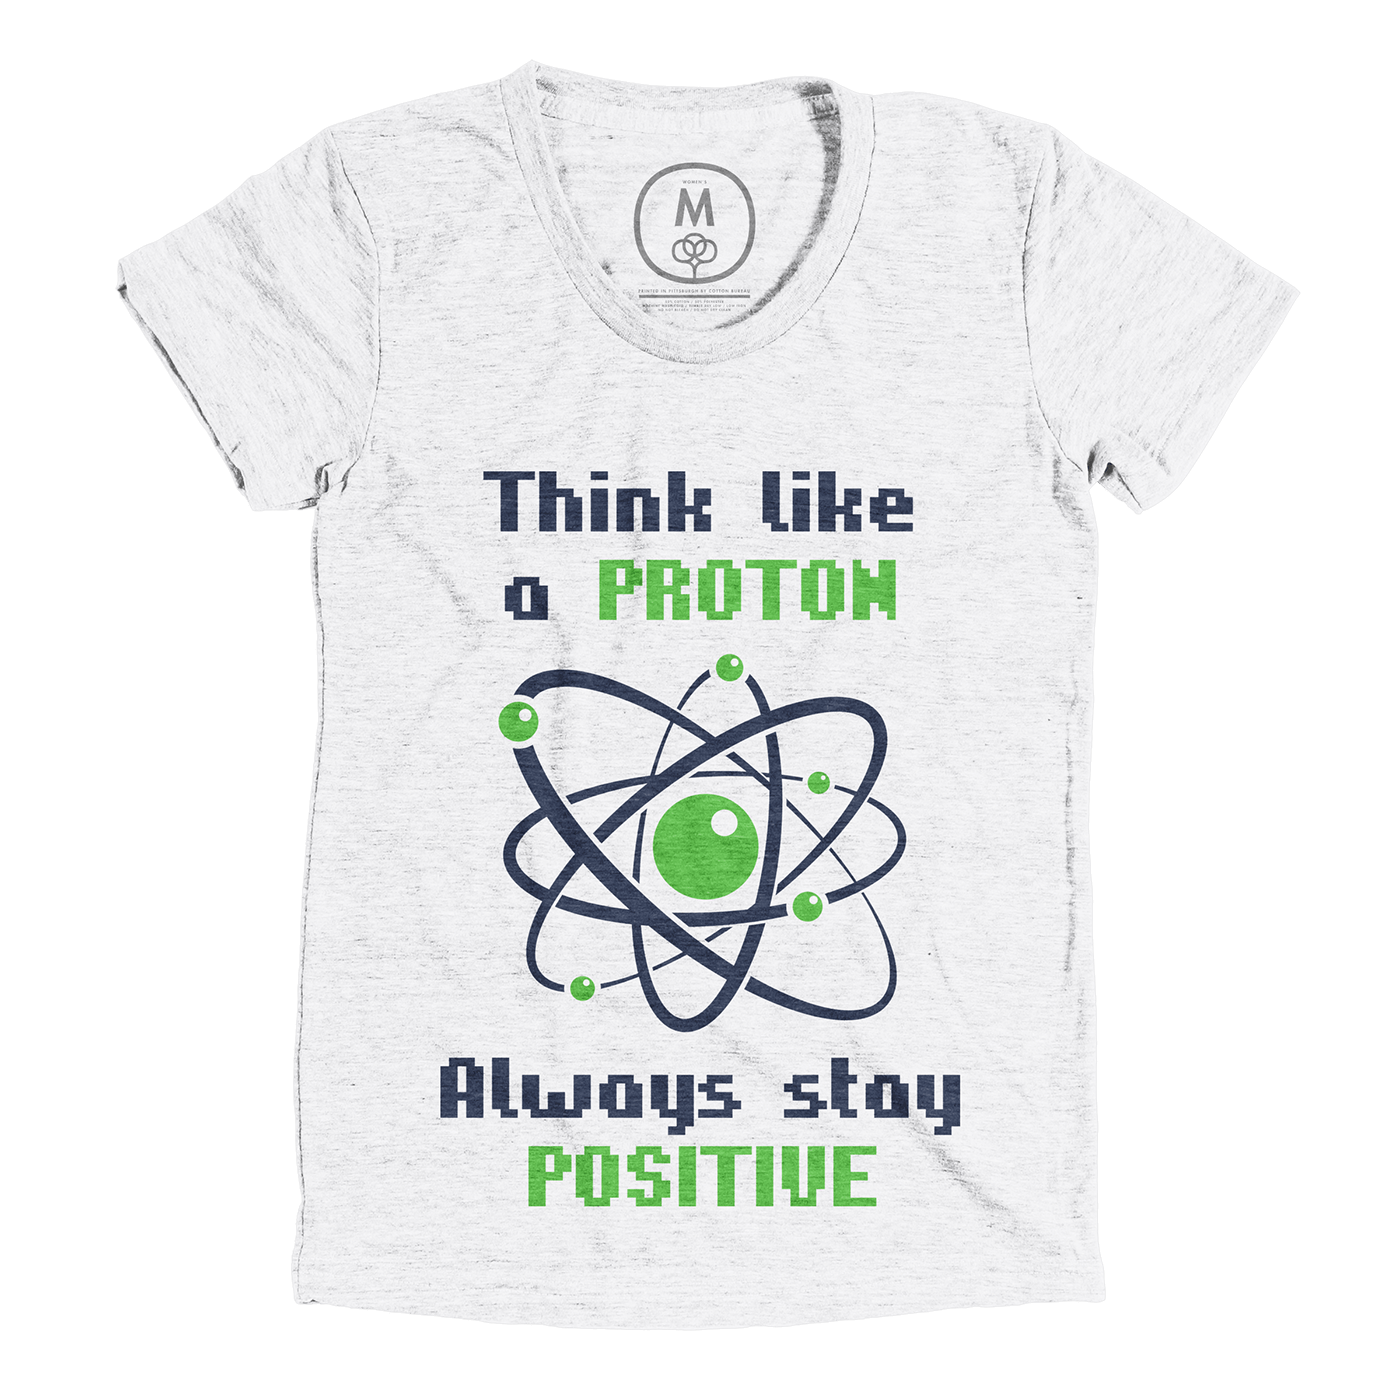 proton t-shirt Fashion  wear atom physics Positive Electrons particle green